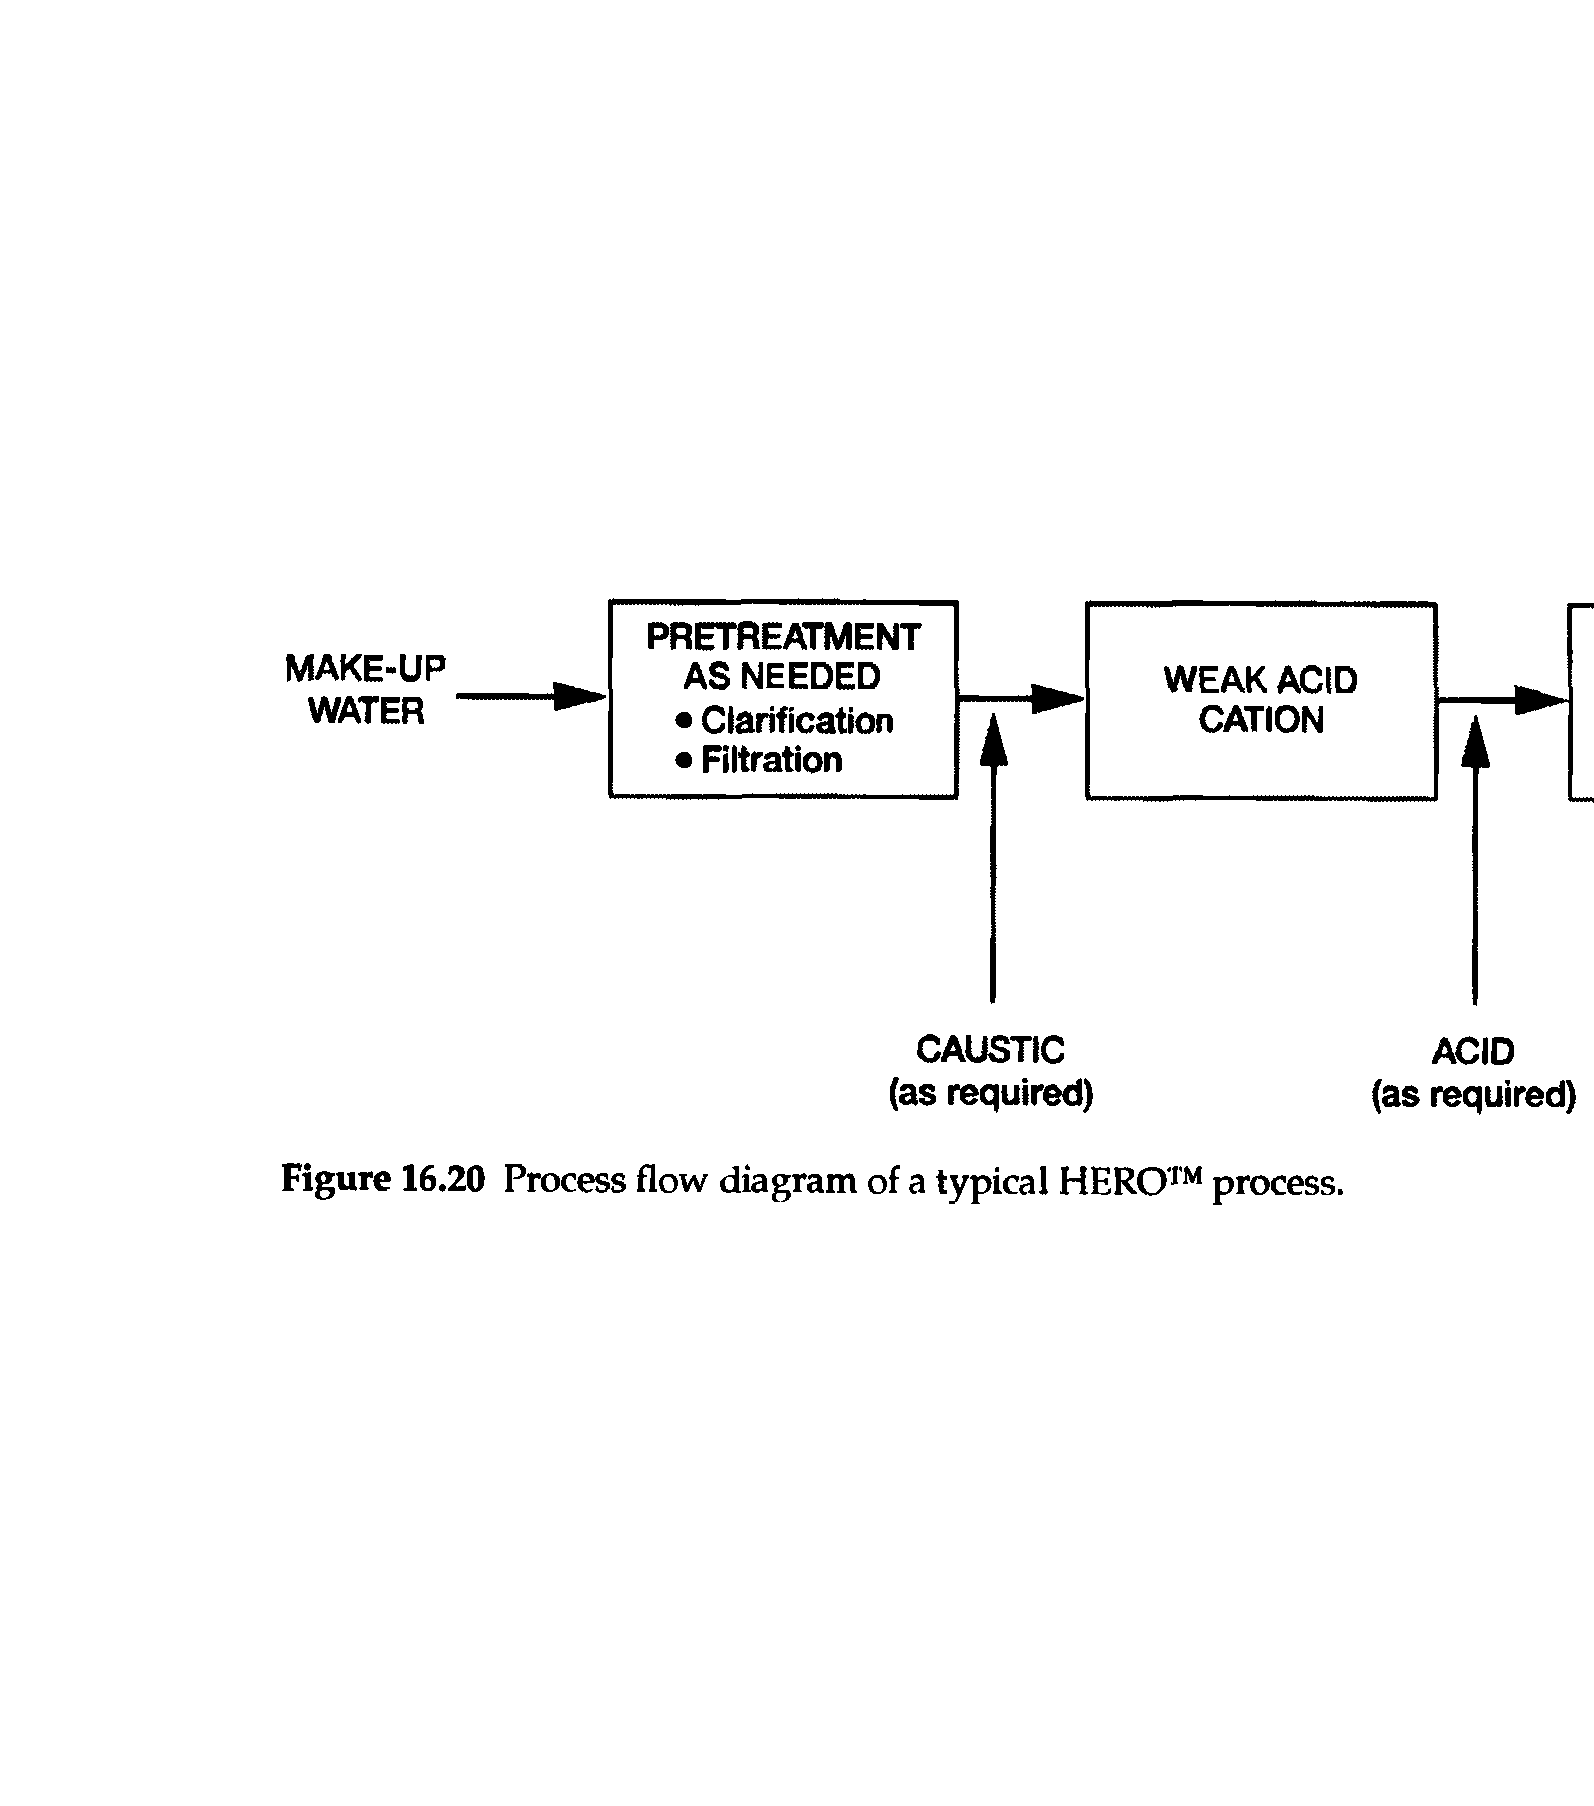 Figure 16.20 Process flow diagram of a typical HERO process.